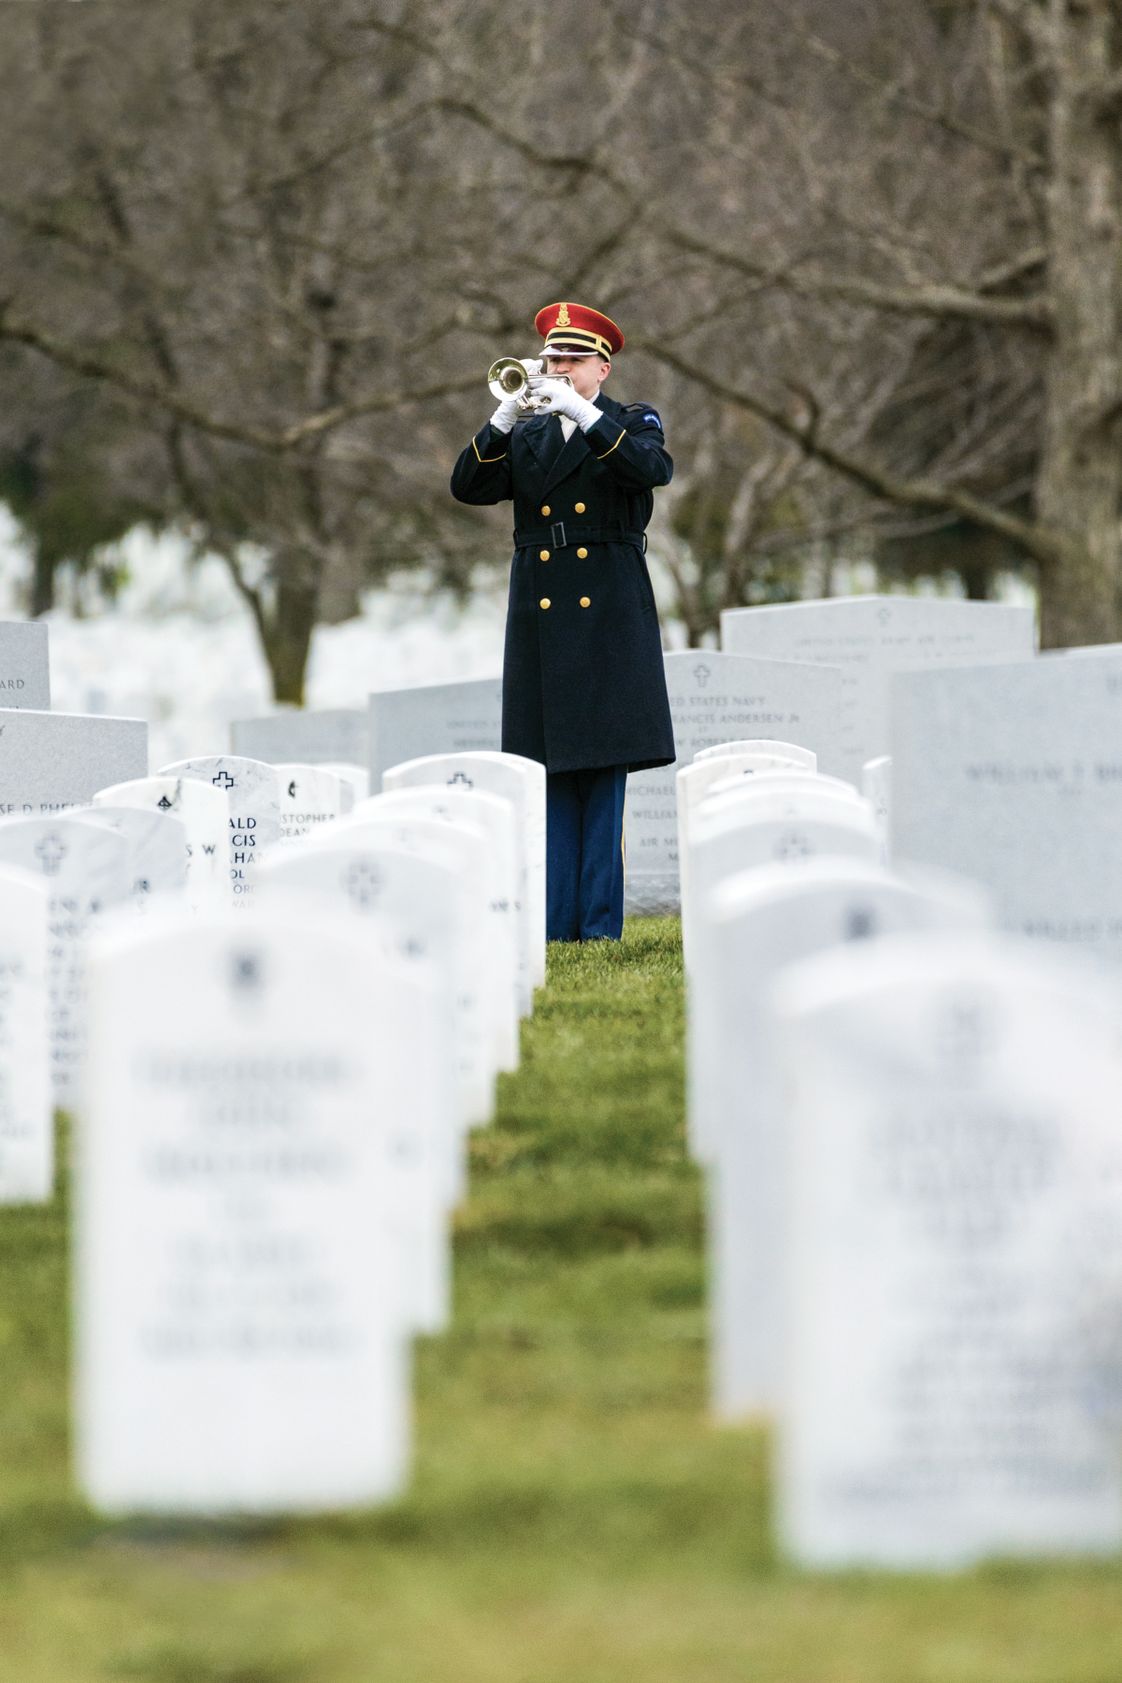  A trumpet player in the U.S. Army Band plays Taps